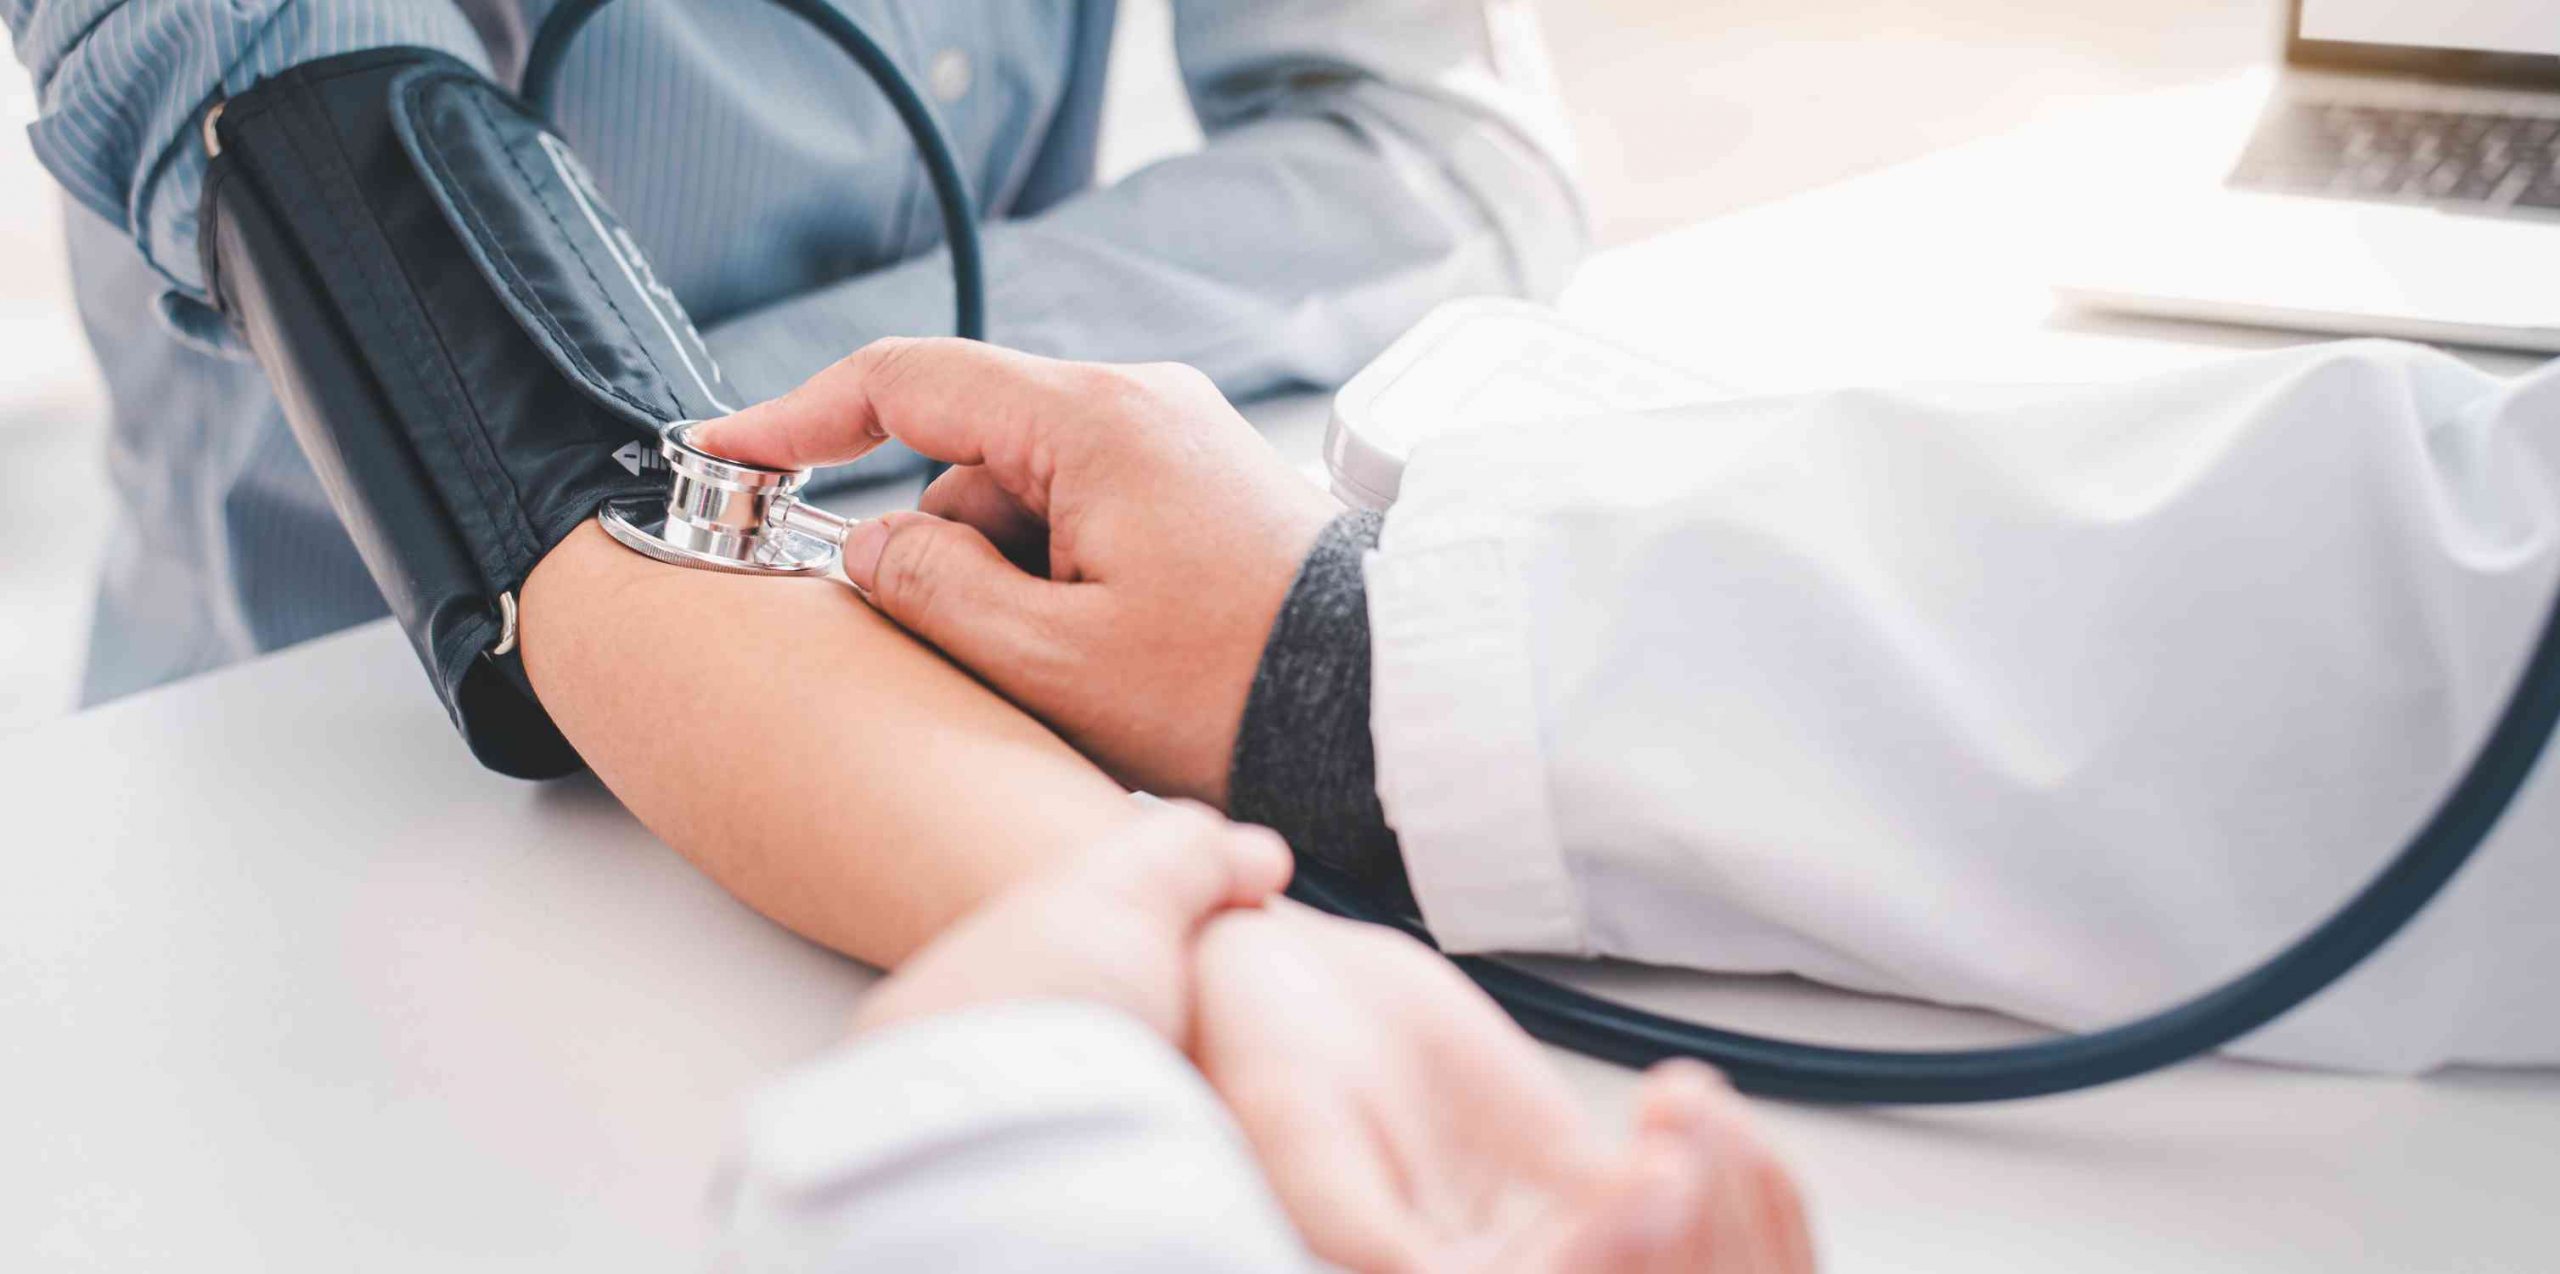 How Does Hypertension Affect Your Heart?